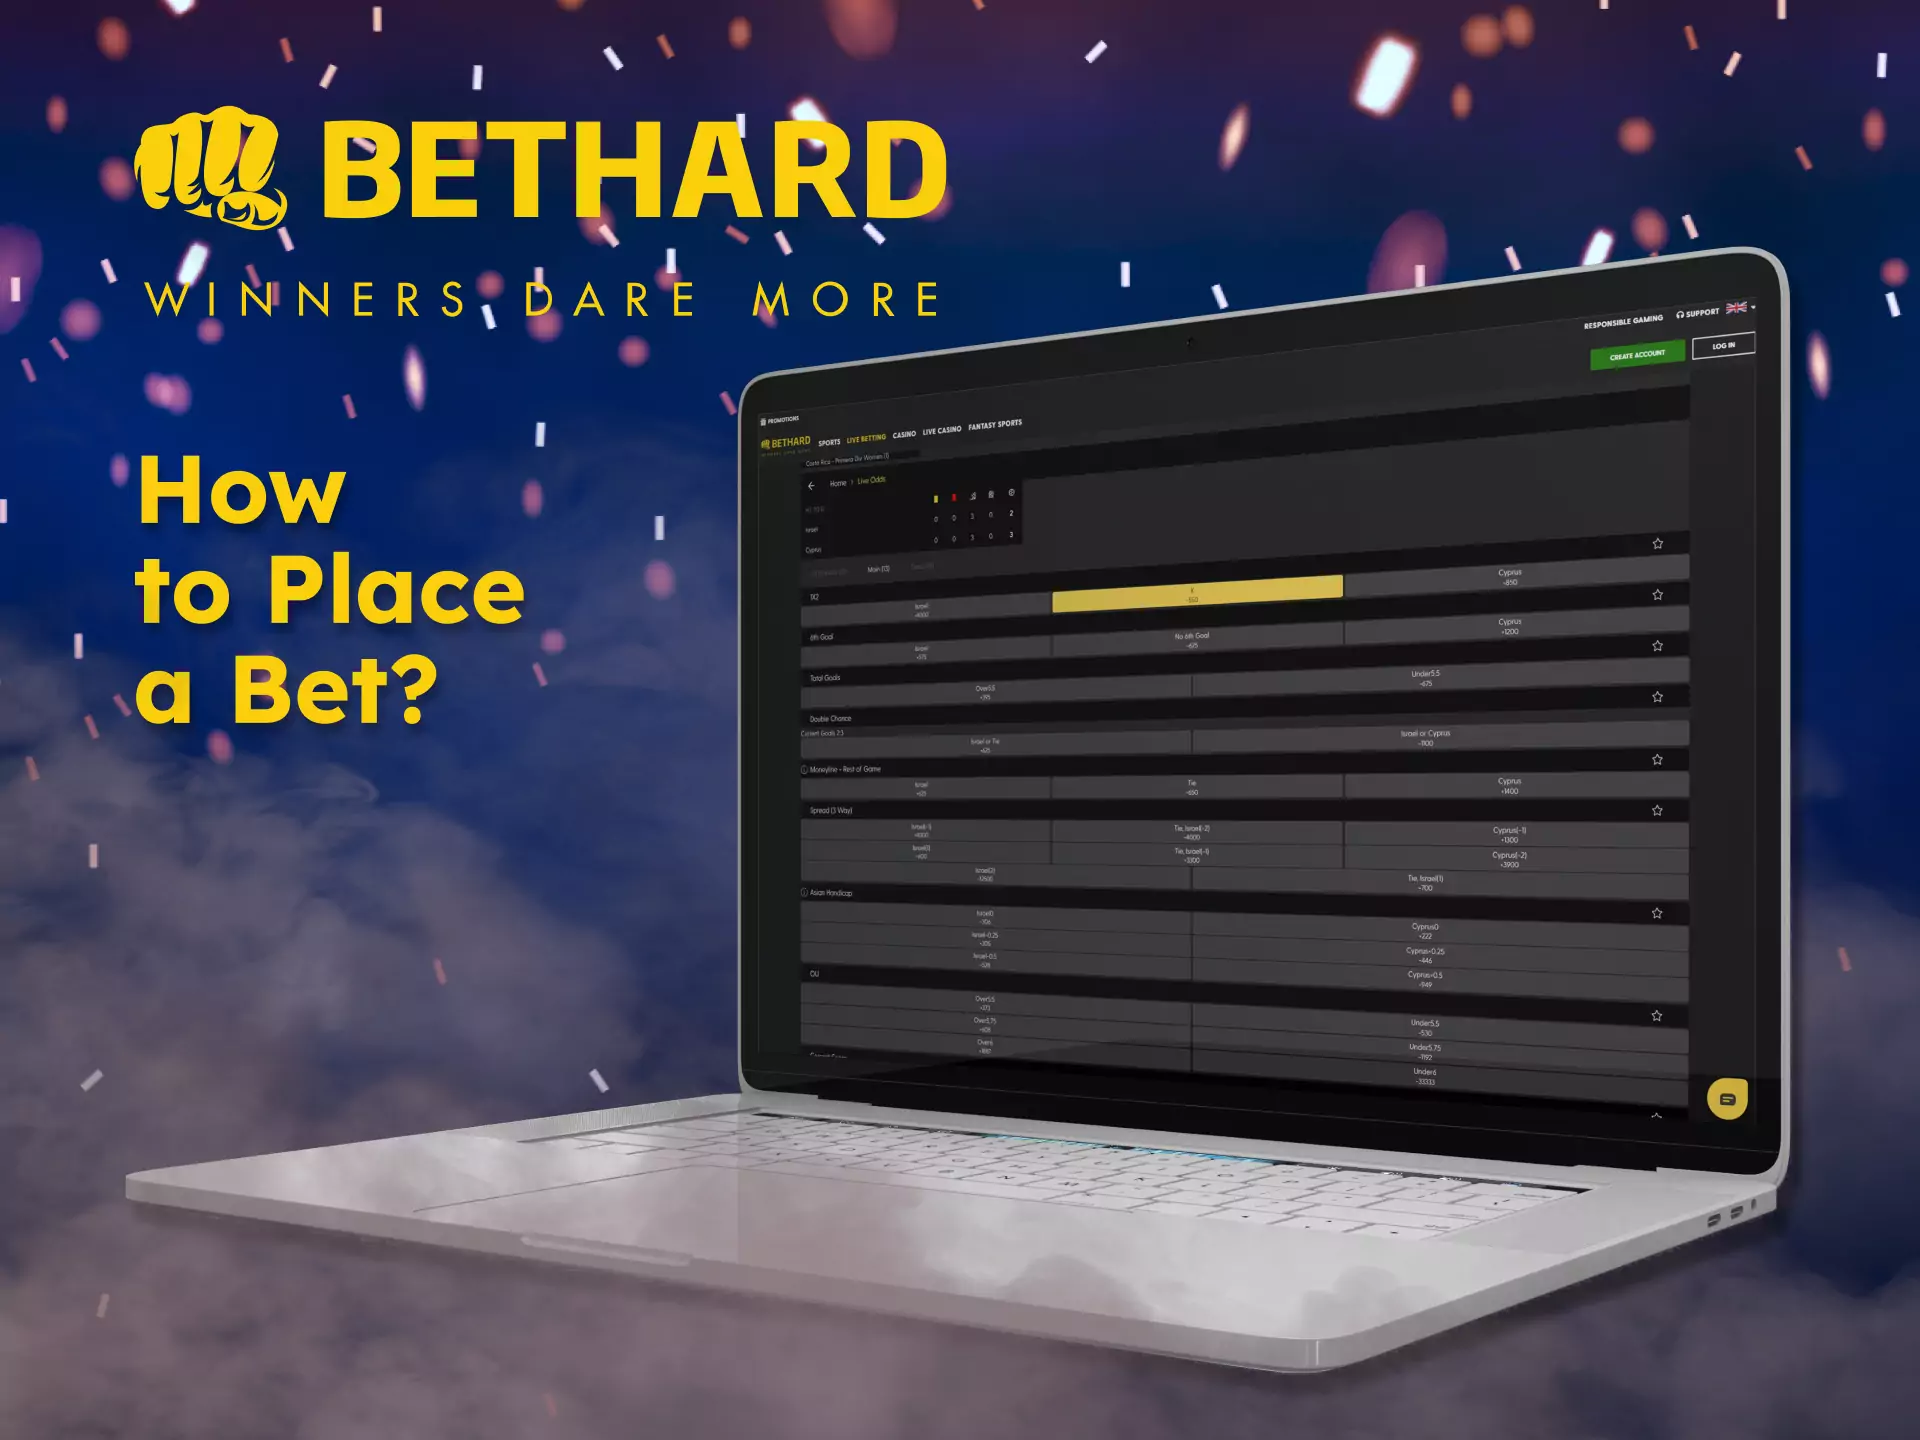 Learn how to place bets at Bethard with this instruction.